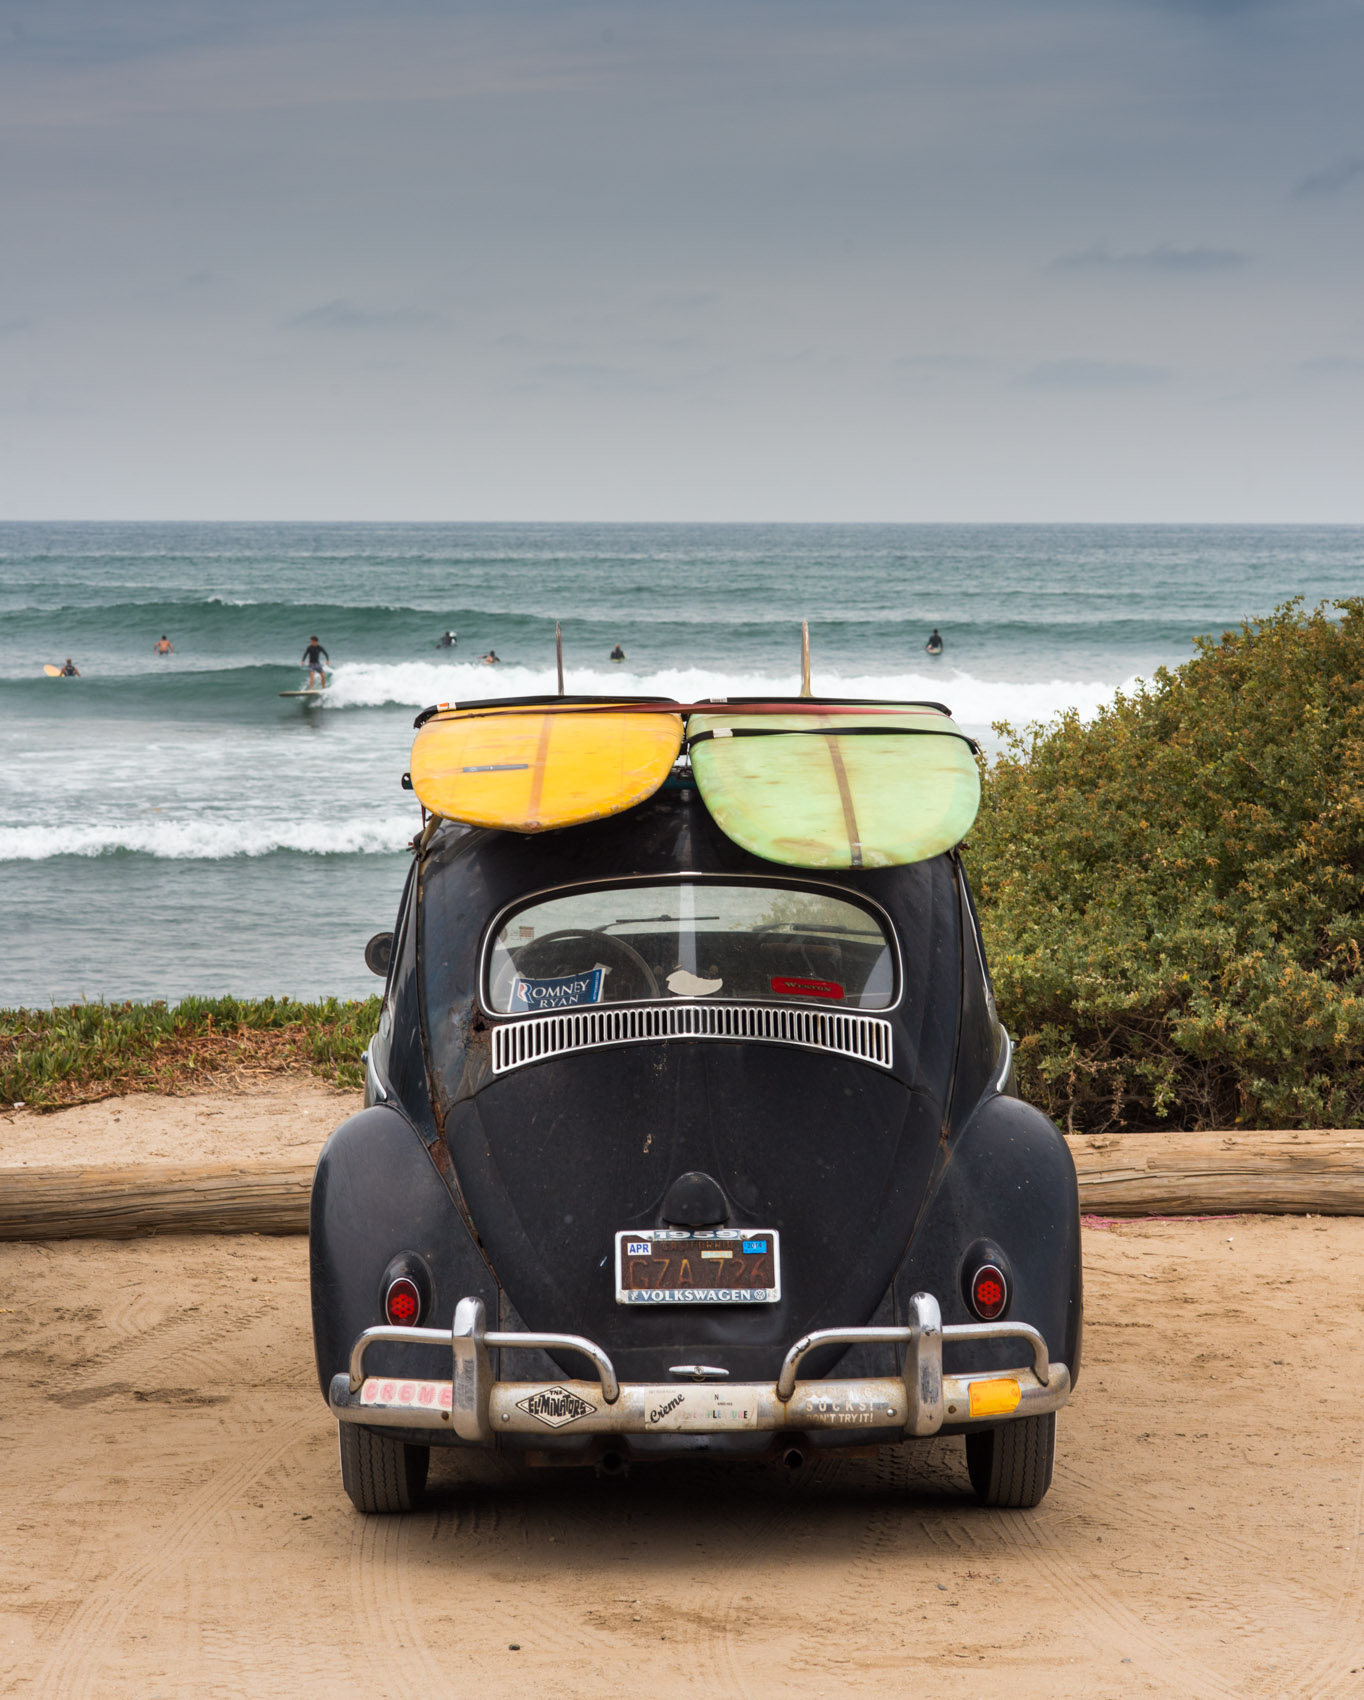 An old VW Beetle with surfboards on the roof at San Onofre State Beach, San Clemente, Calif.